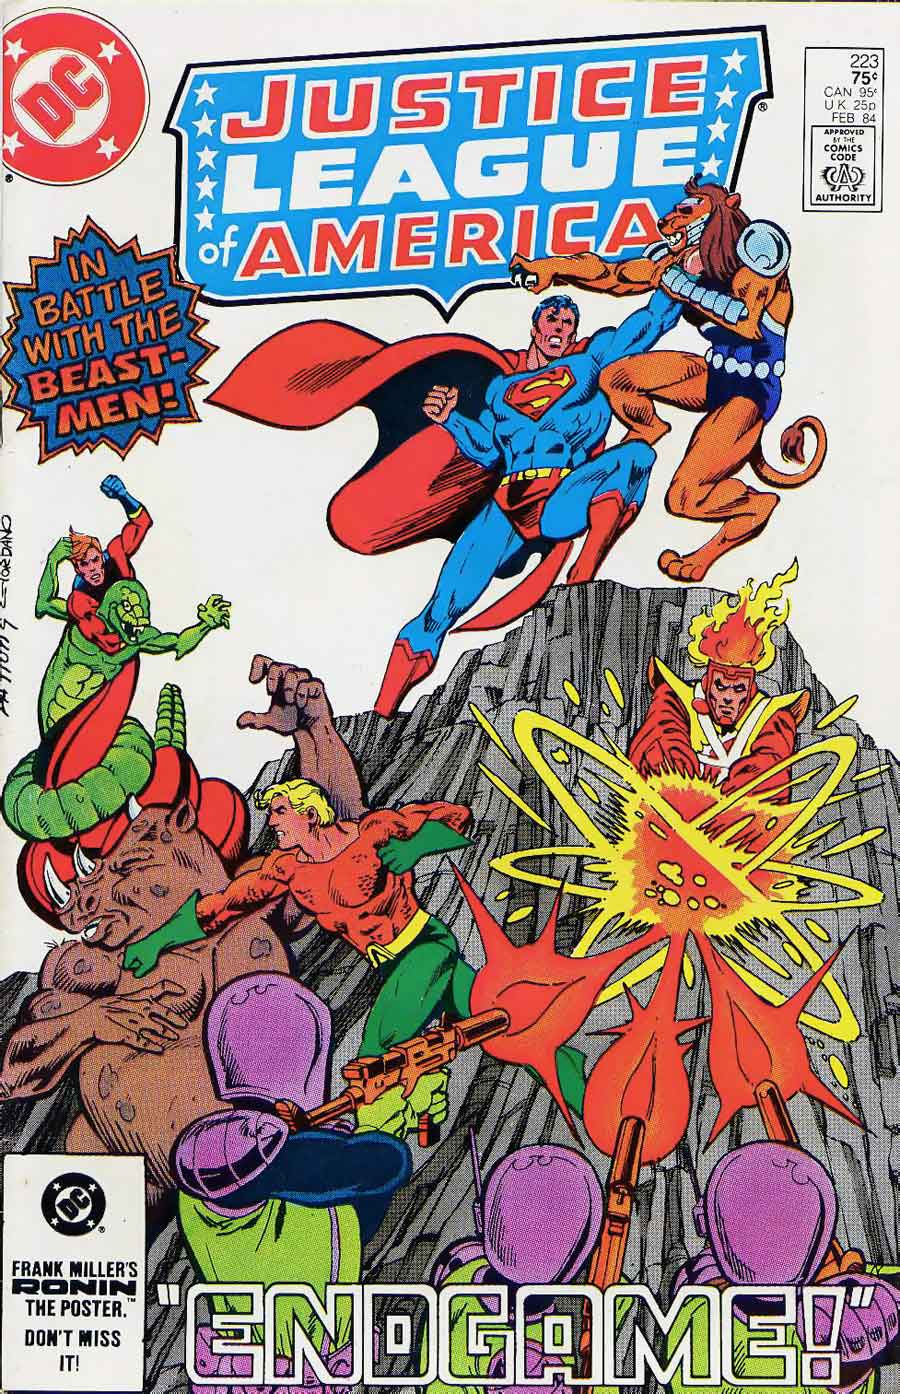 Justice League of America #223 by Gerry Conway, Chuck Patton and Romeo Tanghal